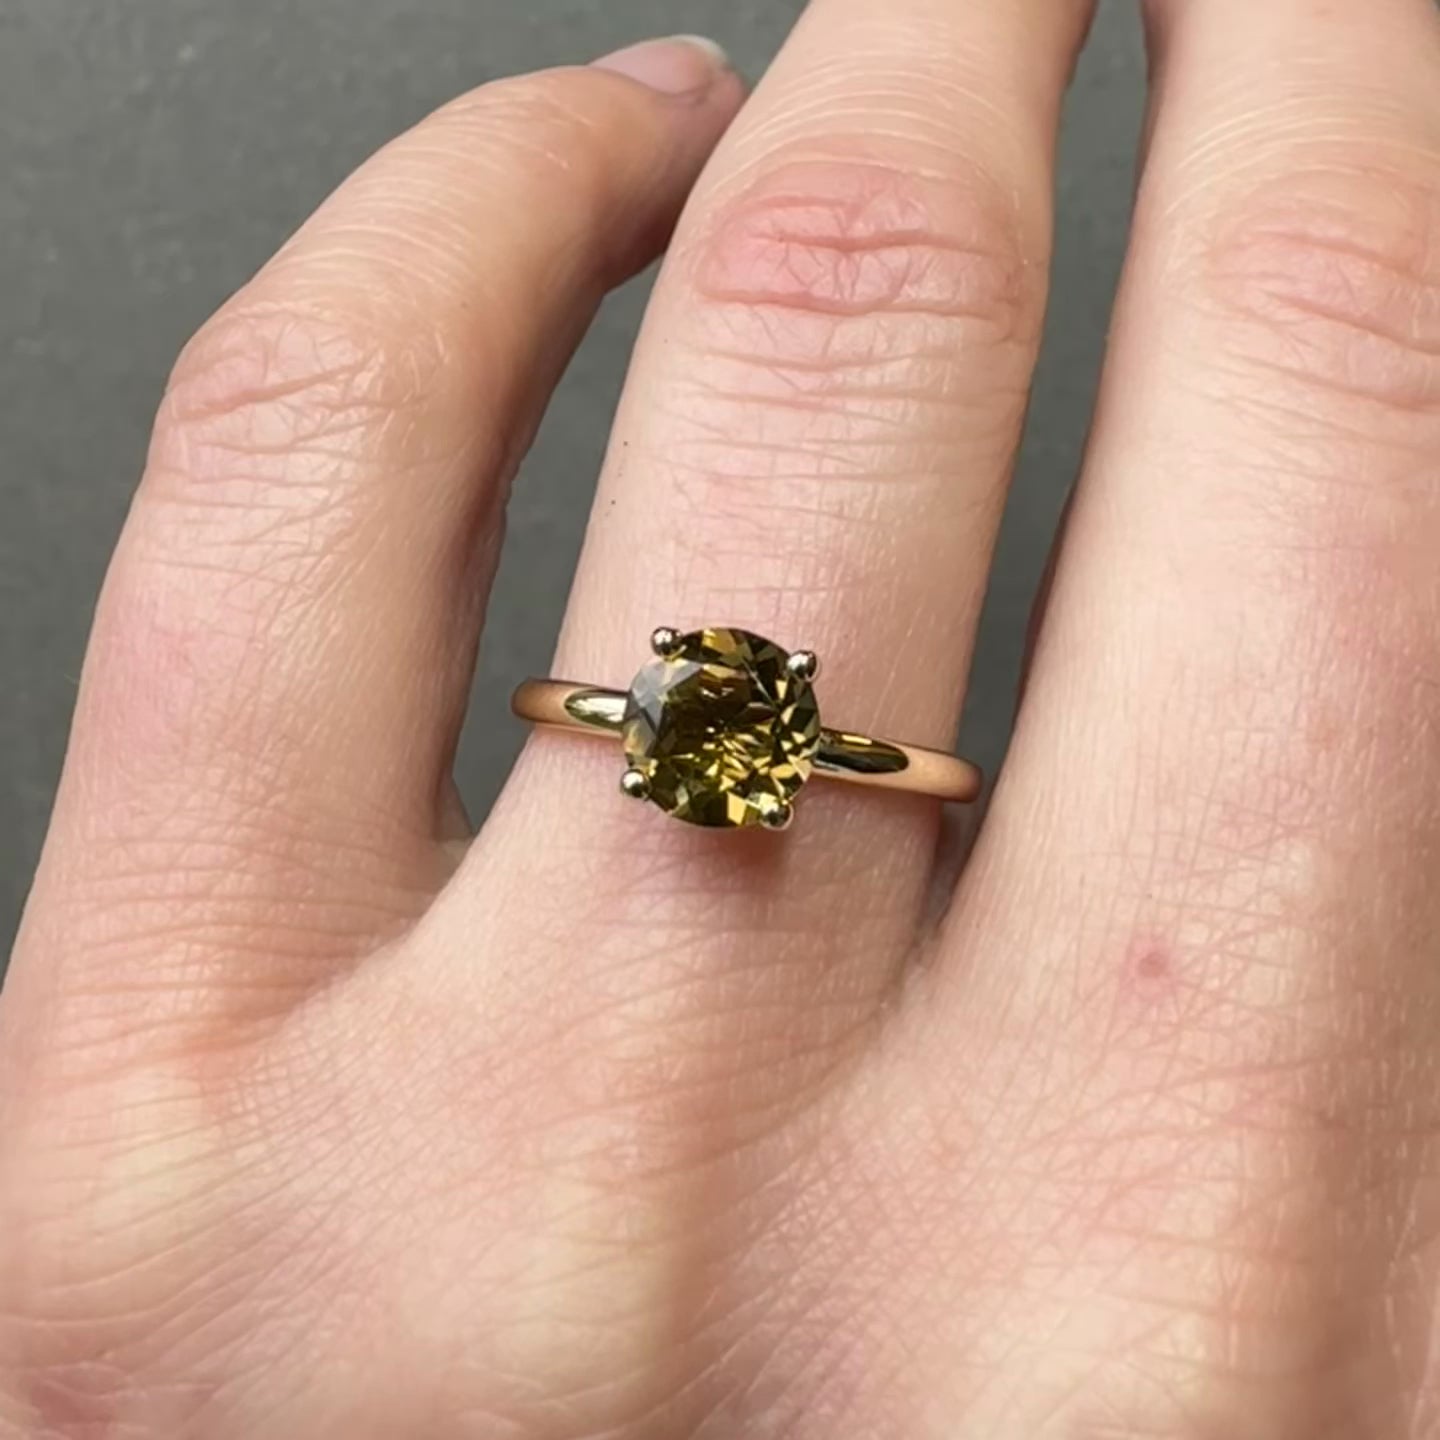 brown tourmaline gold ring on hand